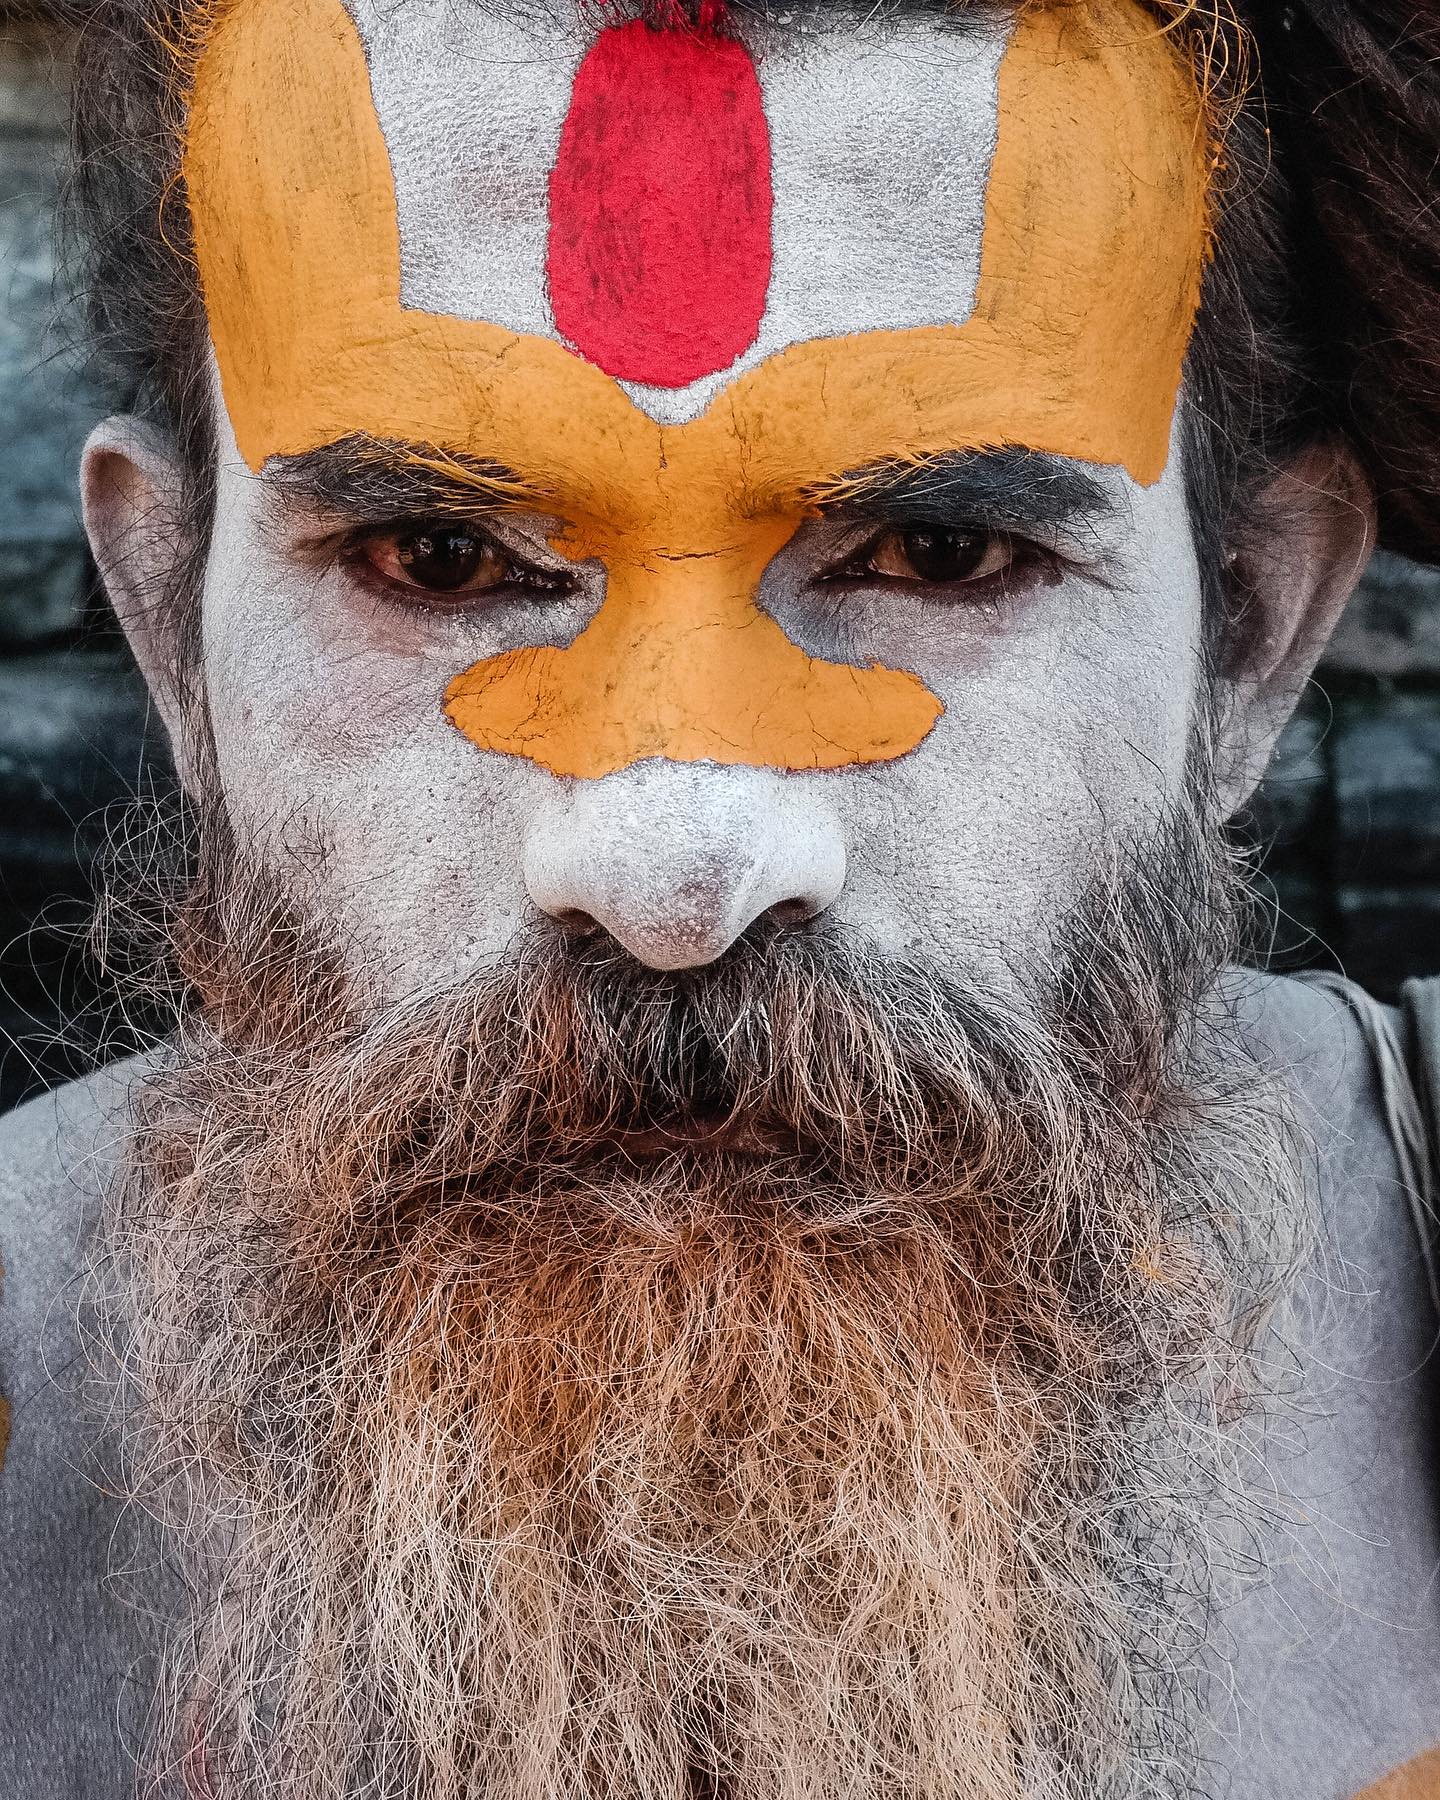 Sadhu near the Pashuatinath temple in Kathmandu.  I always visit the group of sadhus when I’m in town.  They are actually quite friendly and willing to pose for photos ( as long as you give them a little money).